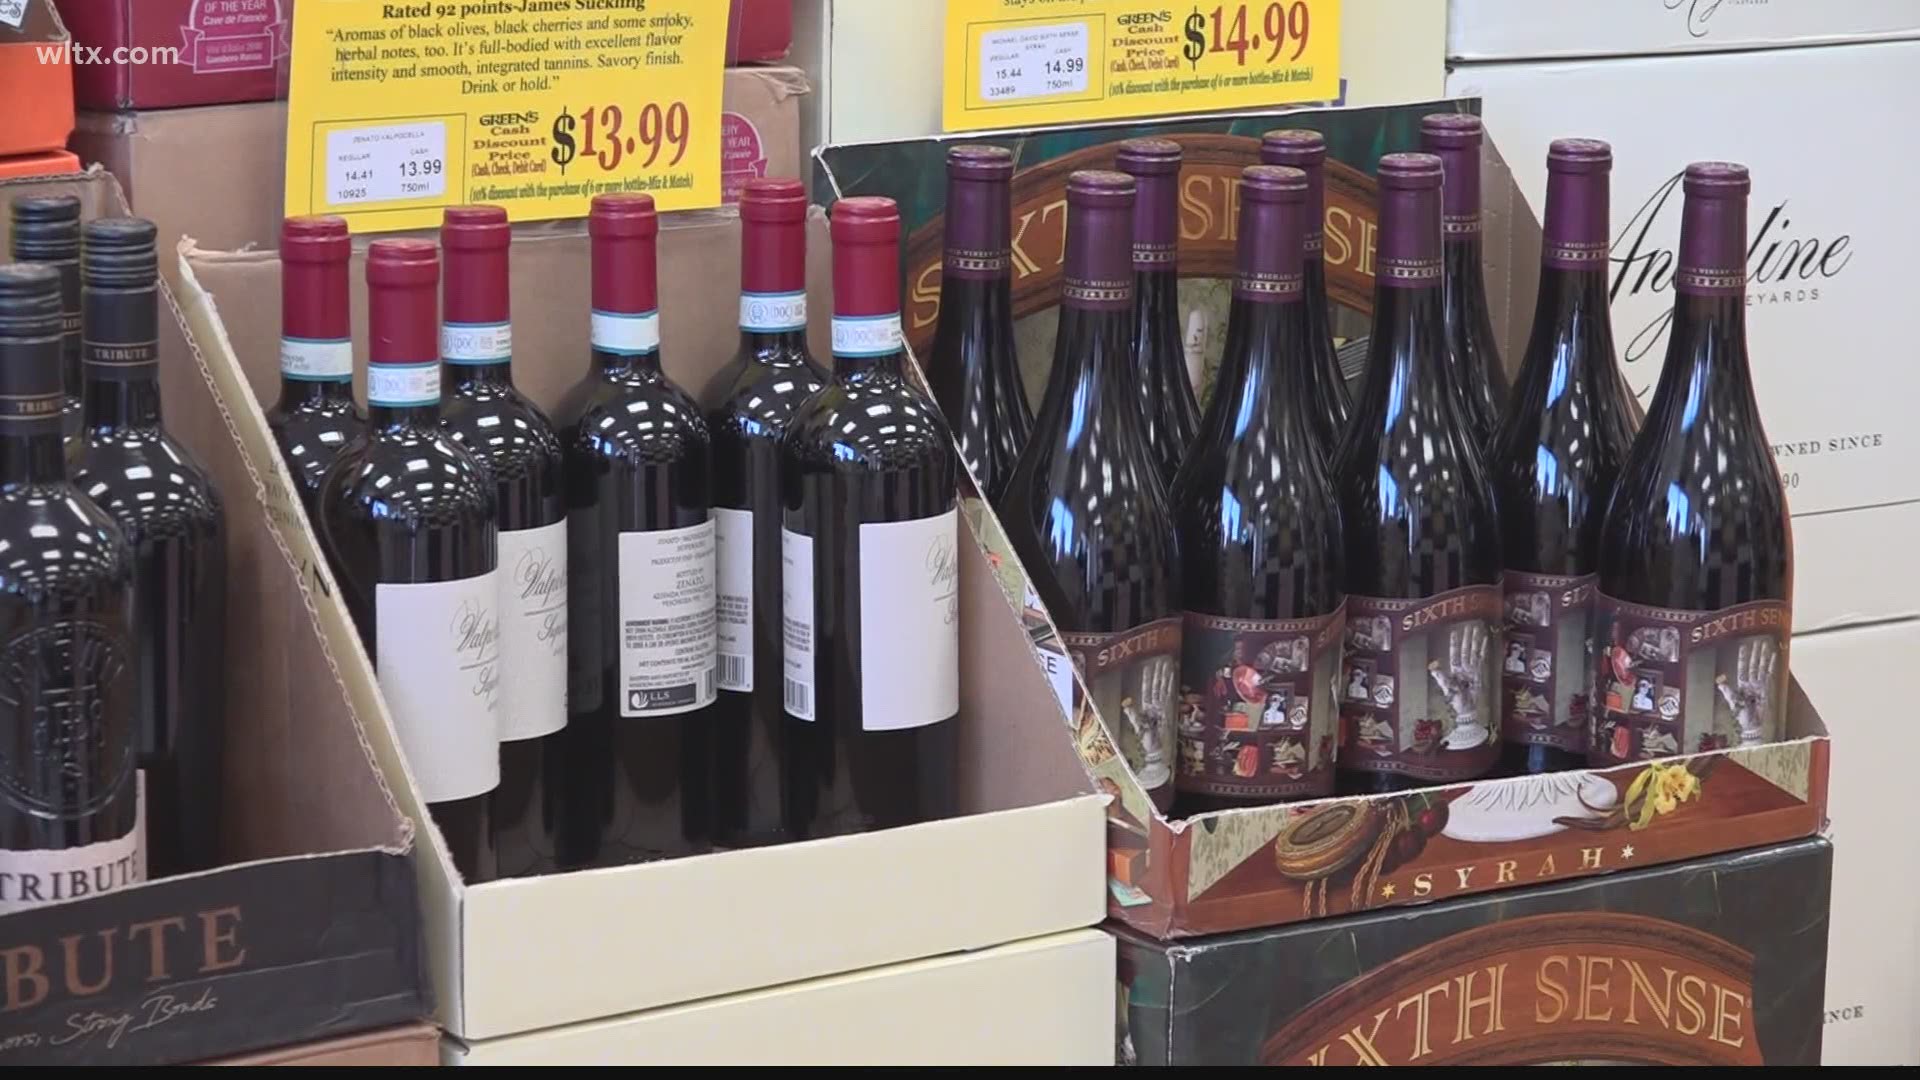 A bill that could allow beer and wine delivery in South Carolina is progressing through the General Assembly and has a chance of becoming law this year.